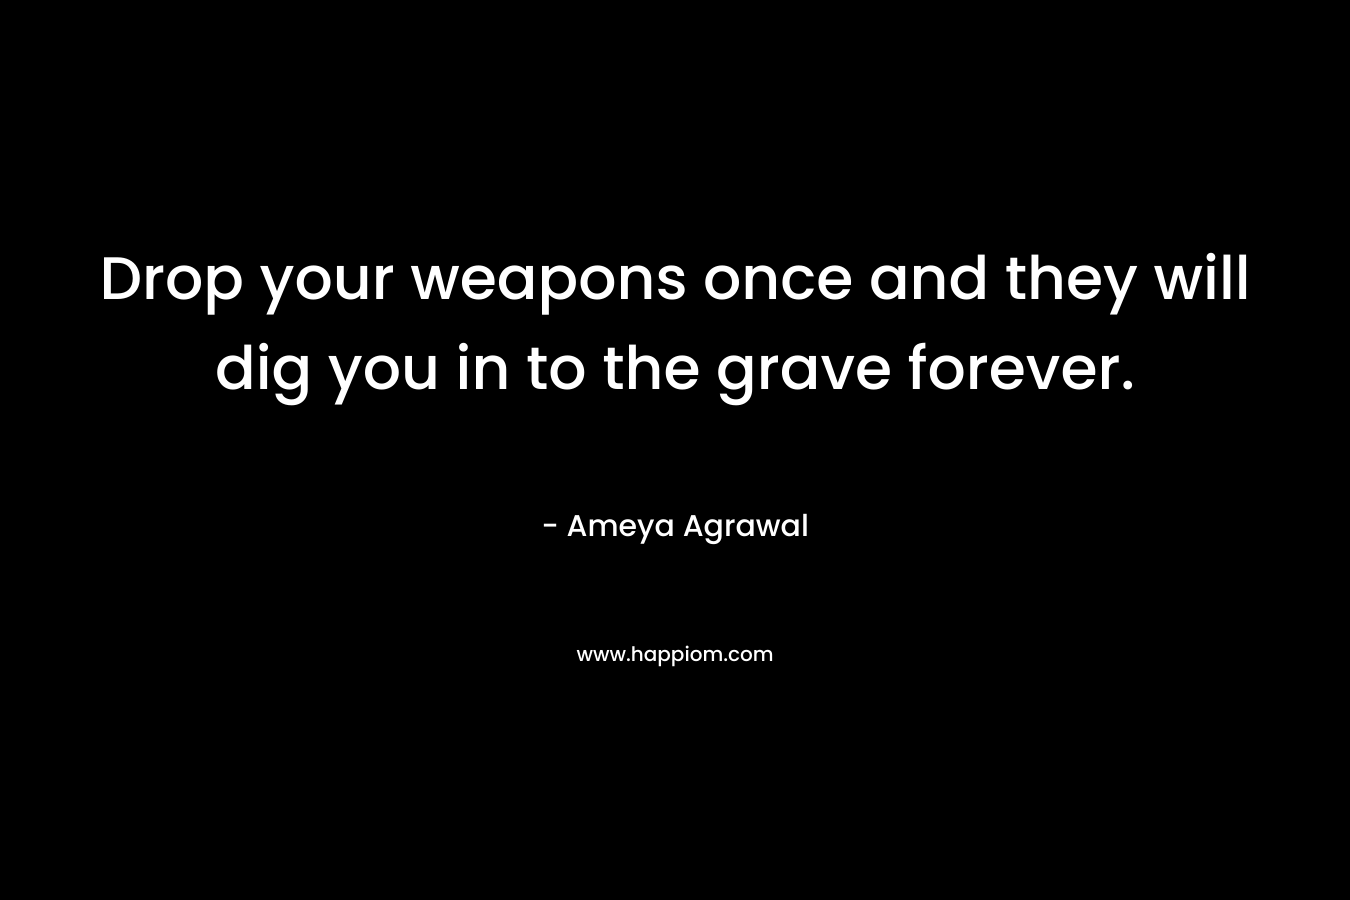 Drop your weapons once and they will dig you in to the grave forever. – Ameya Agrawal